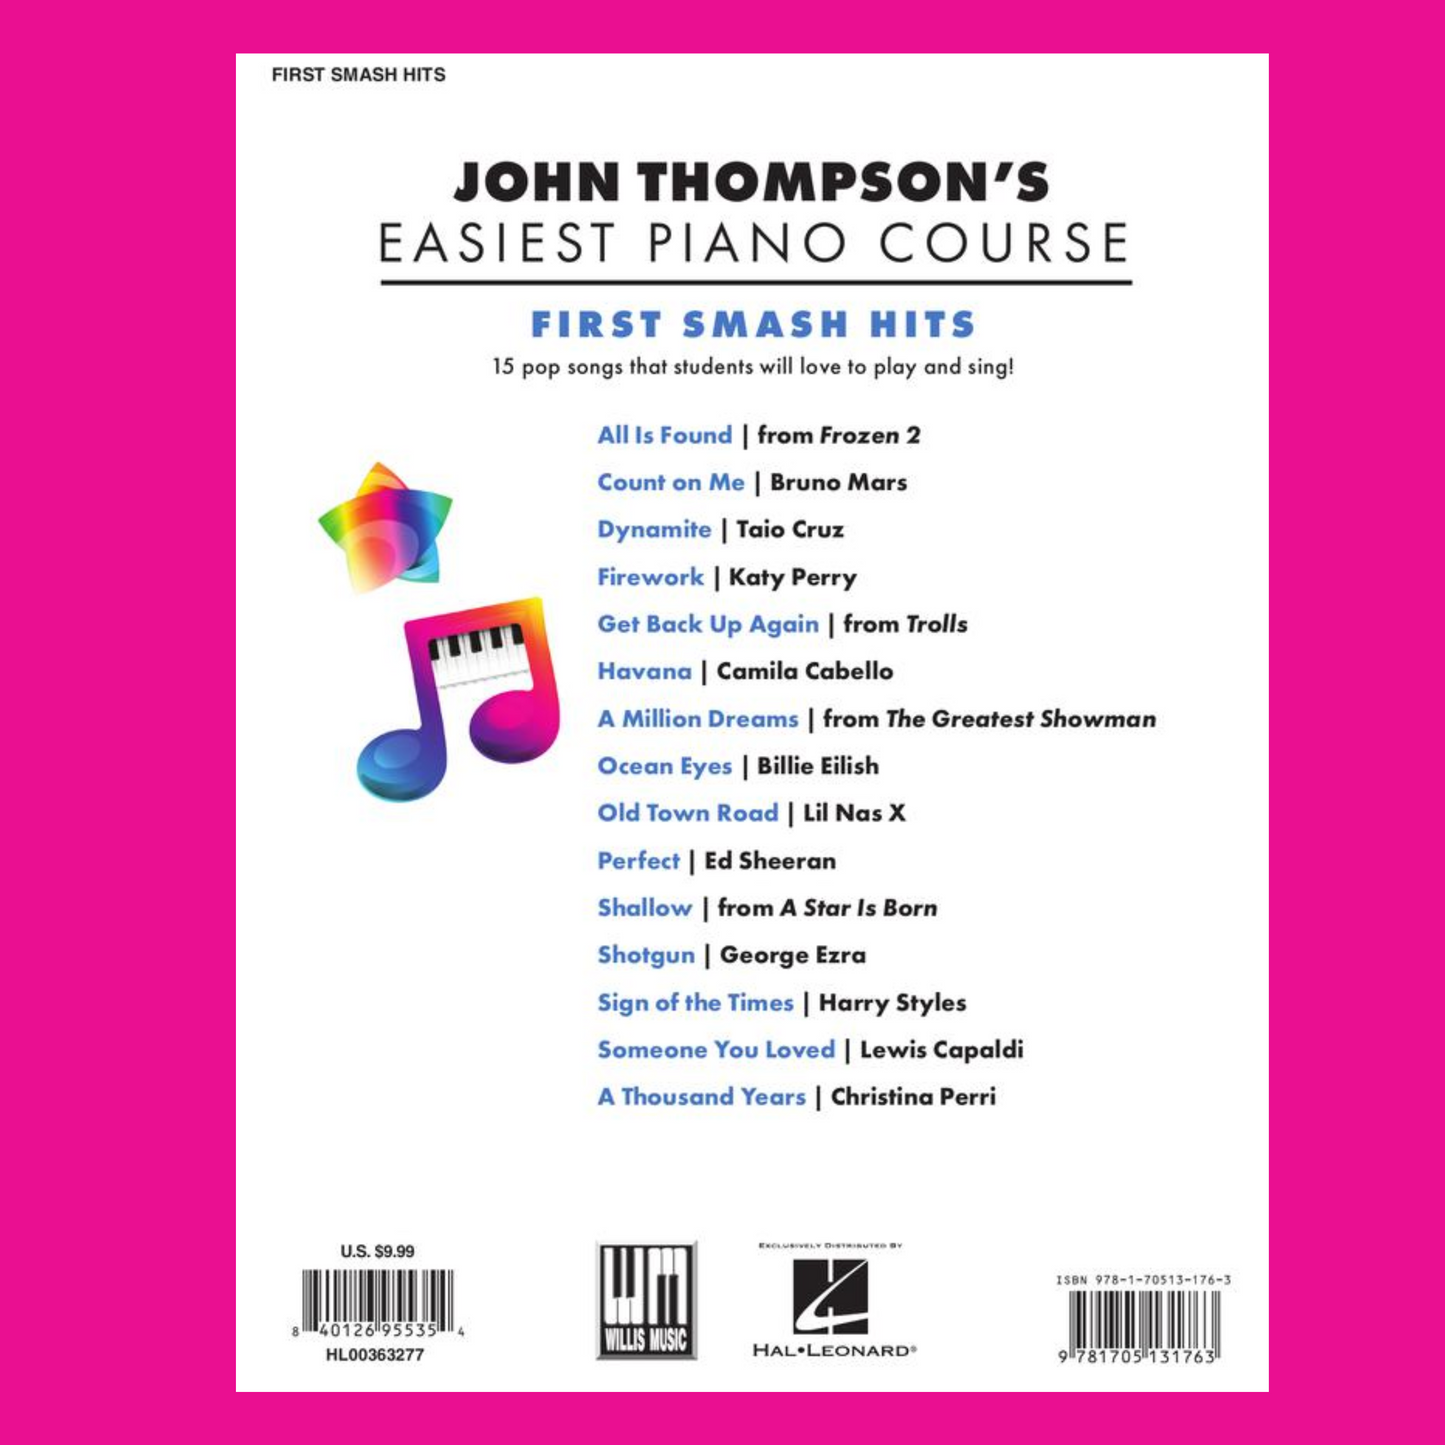 John Thompson's Easiest Piano Course - First Smash Hits Book